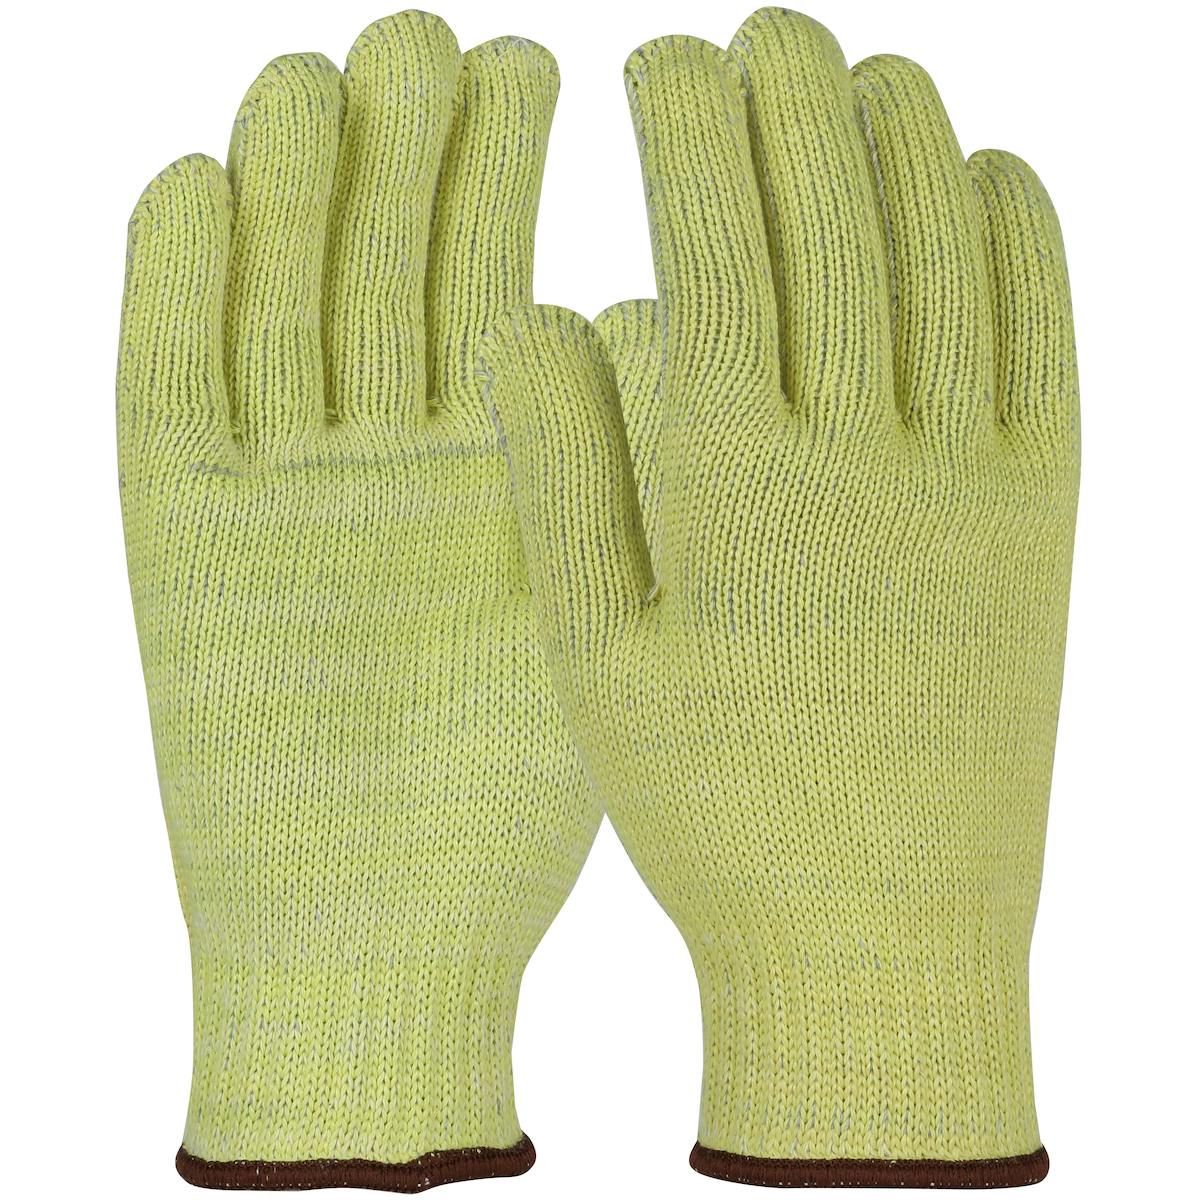 Kut Gard® Seamless Knit ATA® / Aramid Blended Glove with Cotton/Polyester Plating - Heavy Weight (MATA503)_0